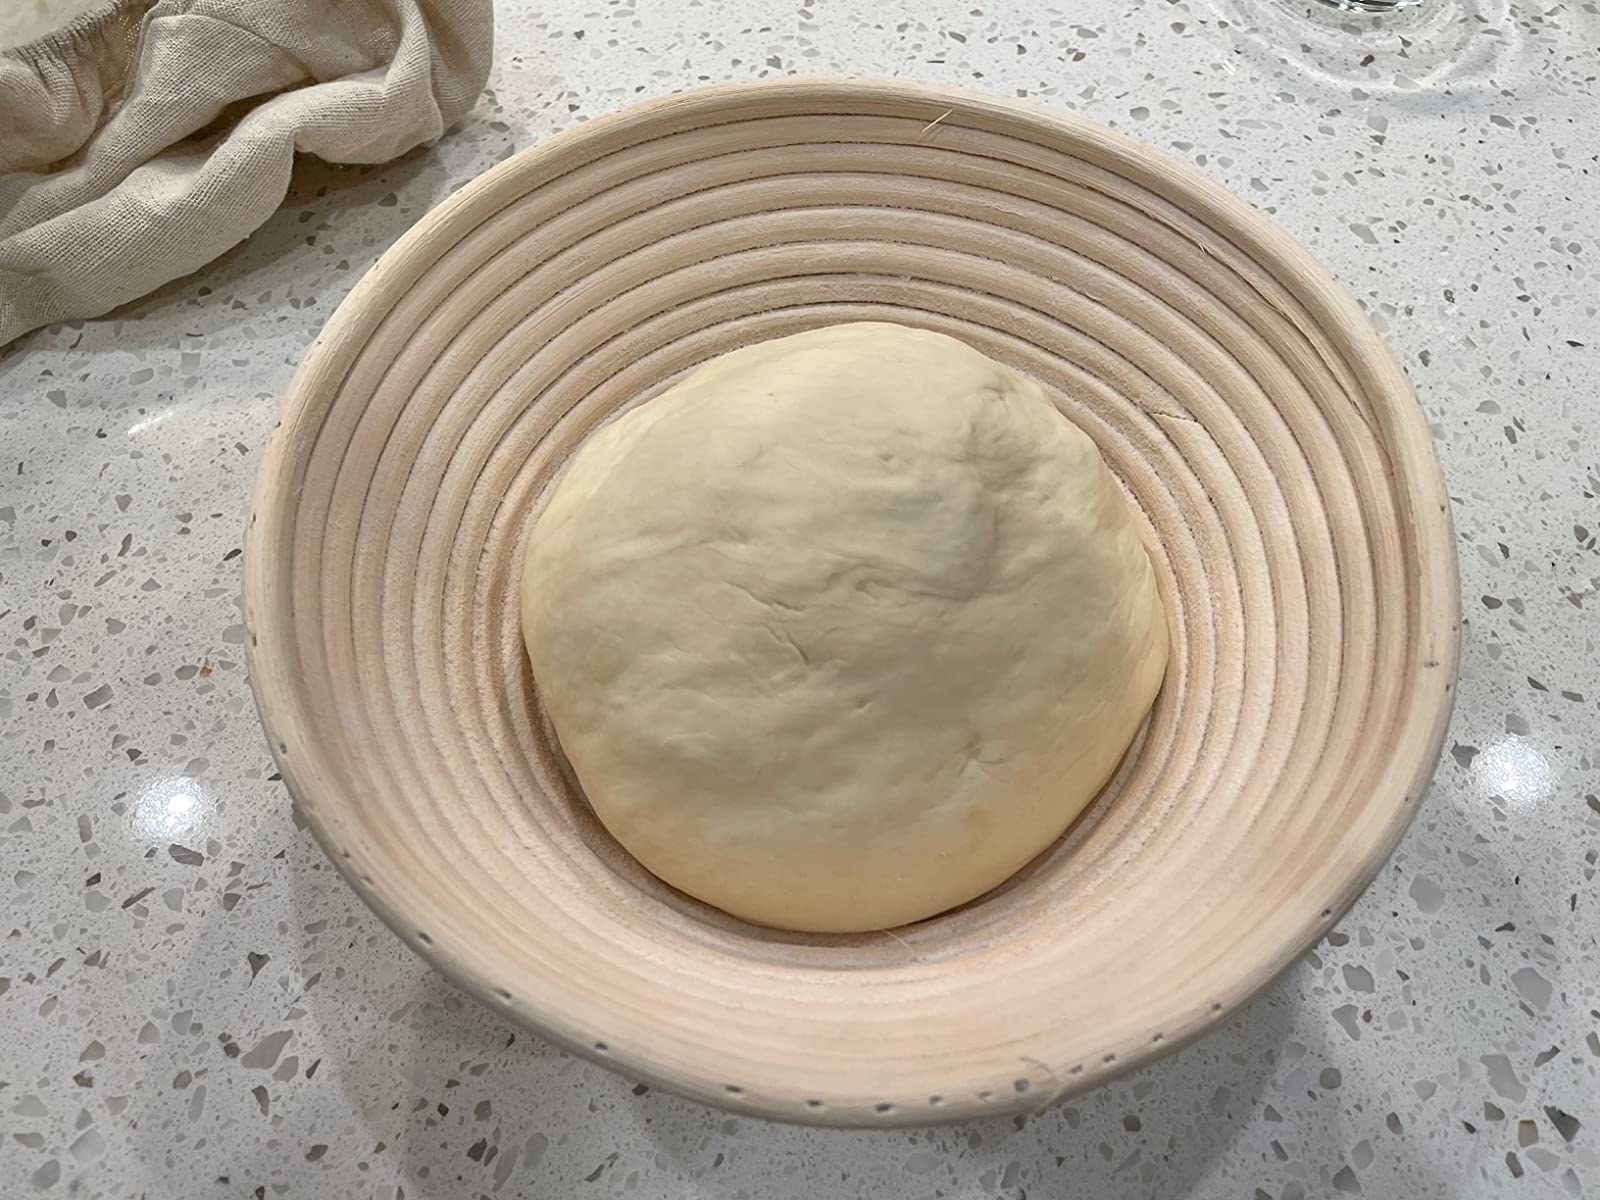 Reviewer image of bread dough in their proofing bowl